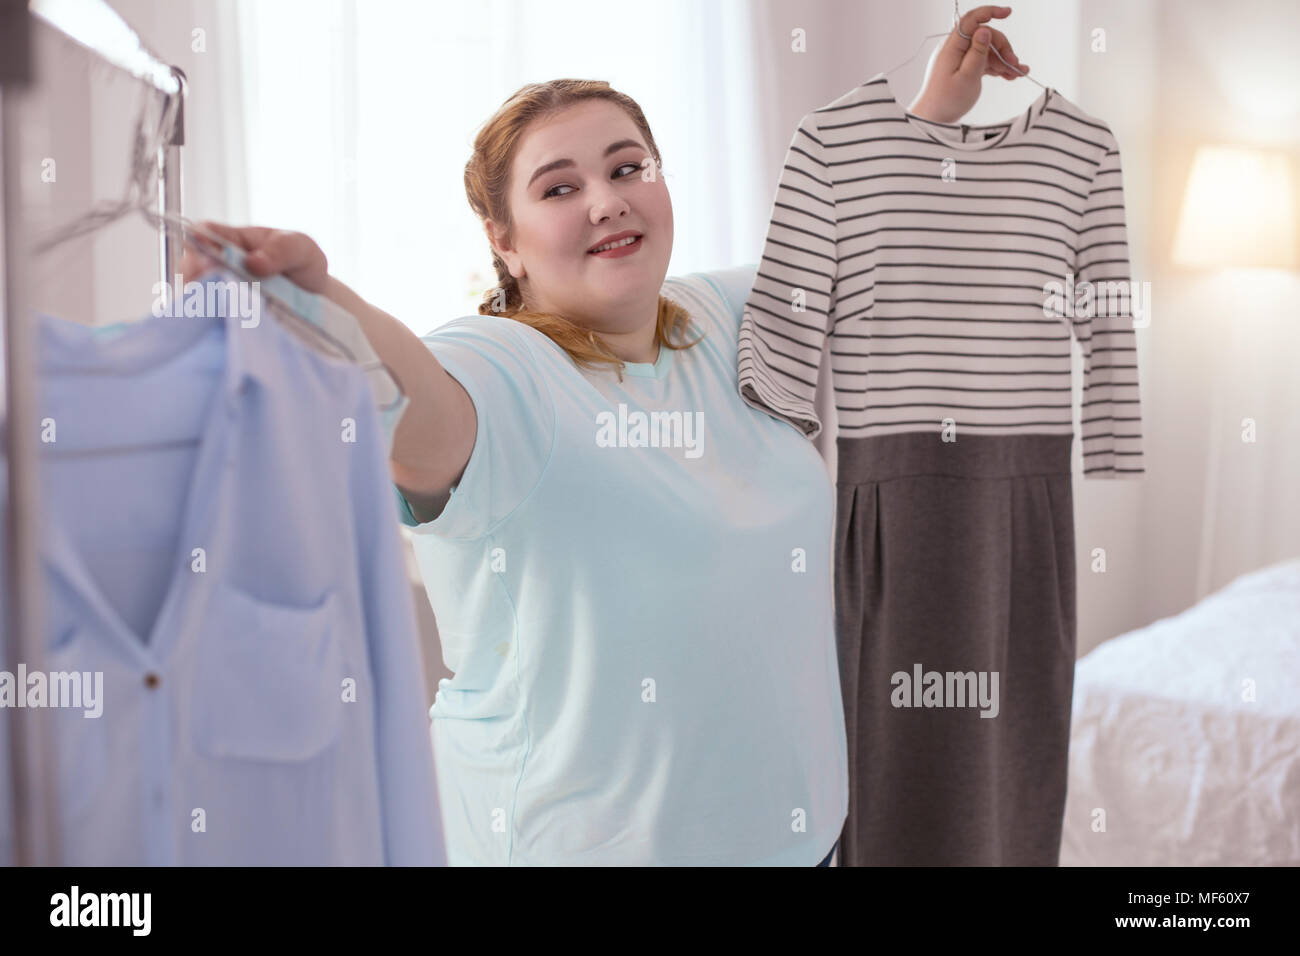 Lovely red-head woman updating her wardrobe Stock Photo